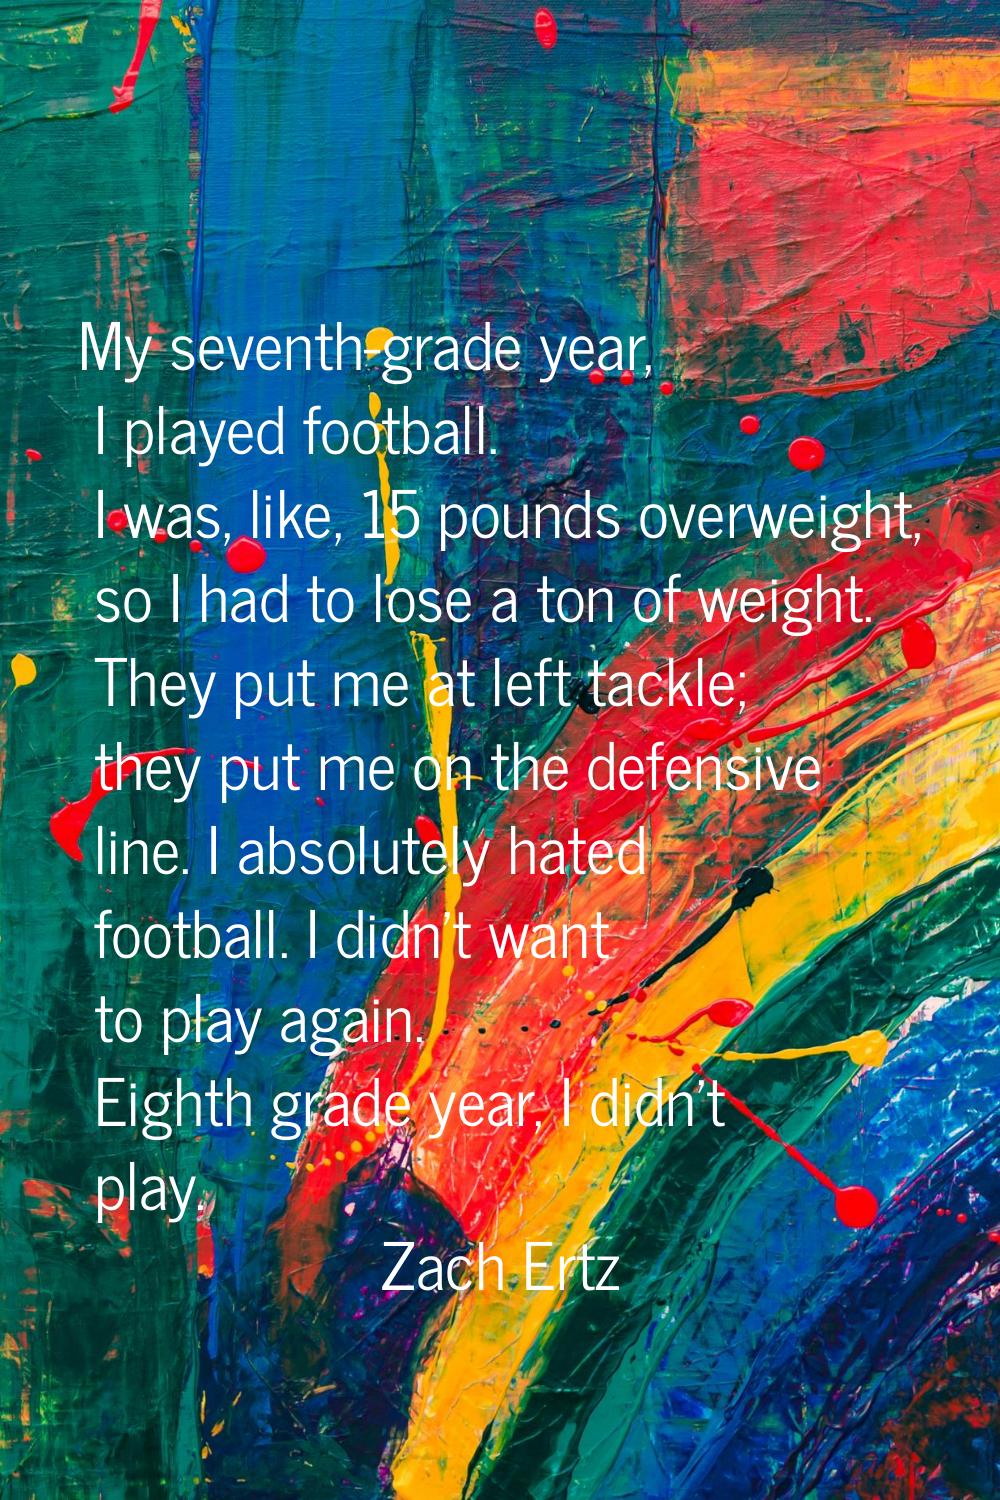 My seventh-grade year, I played football. I was, like, 15 pounds overweight, so I had to lose a ton